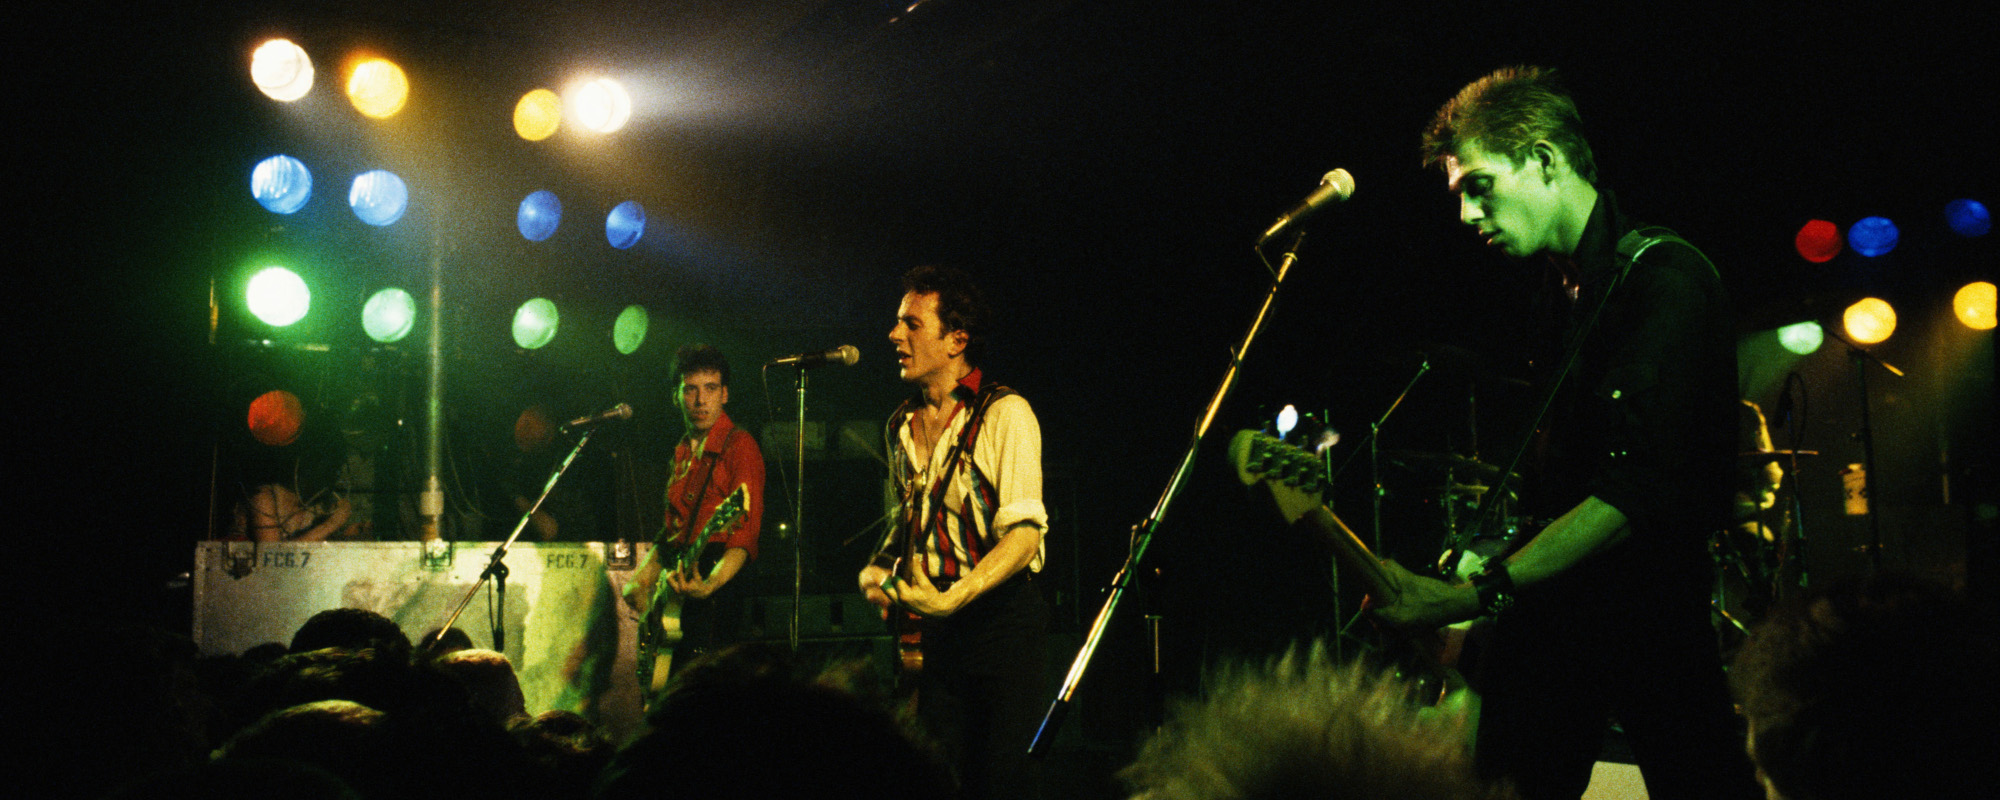 Defying the “Punk Rock Police”: The Story Behind “Train In Vain (Stand By Me)” by The Clash